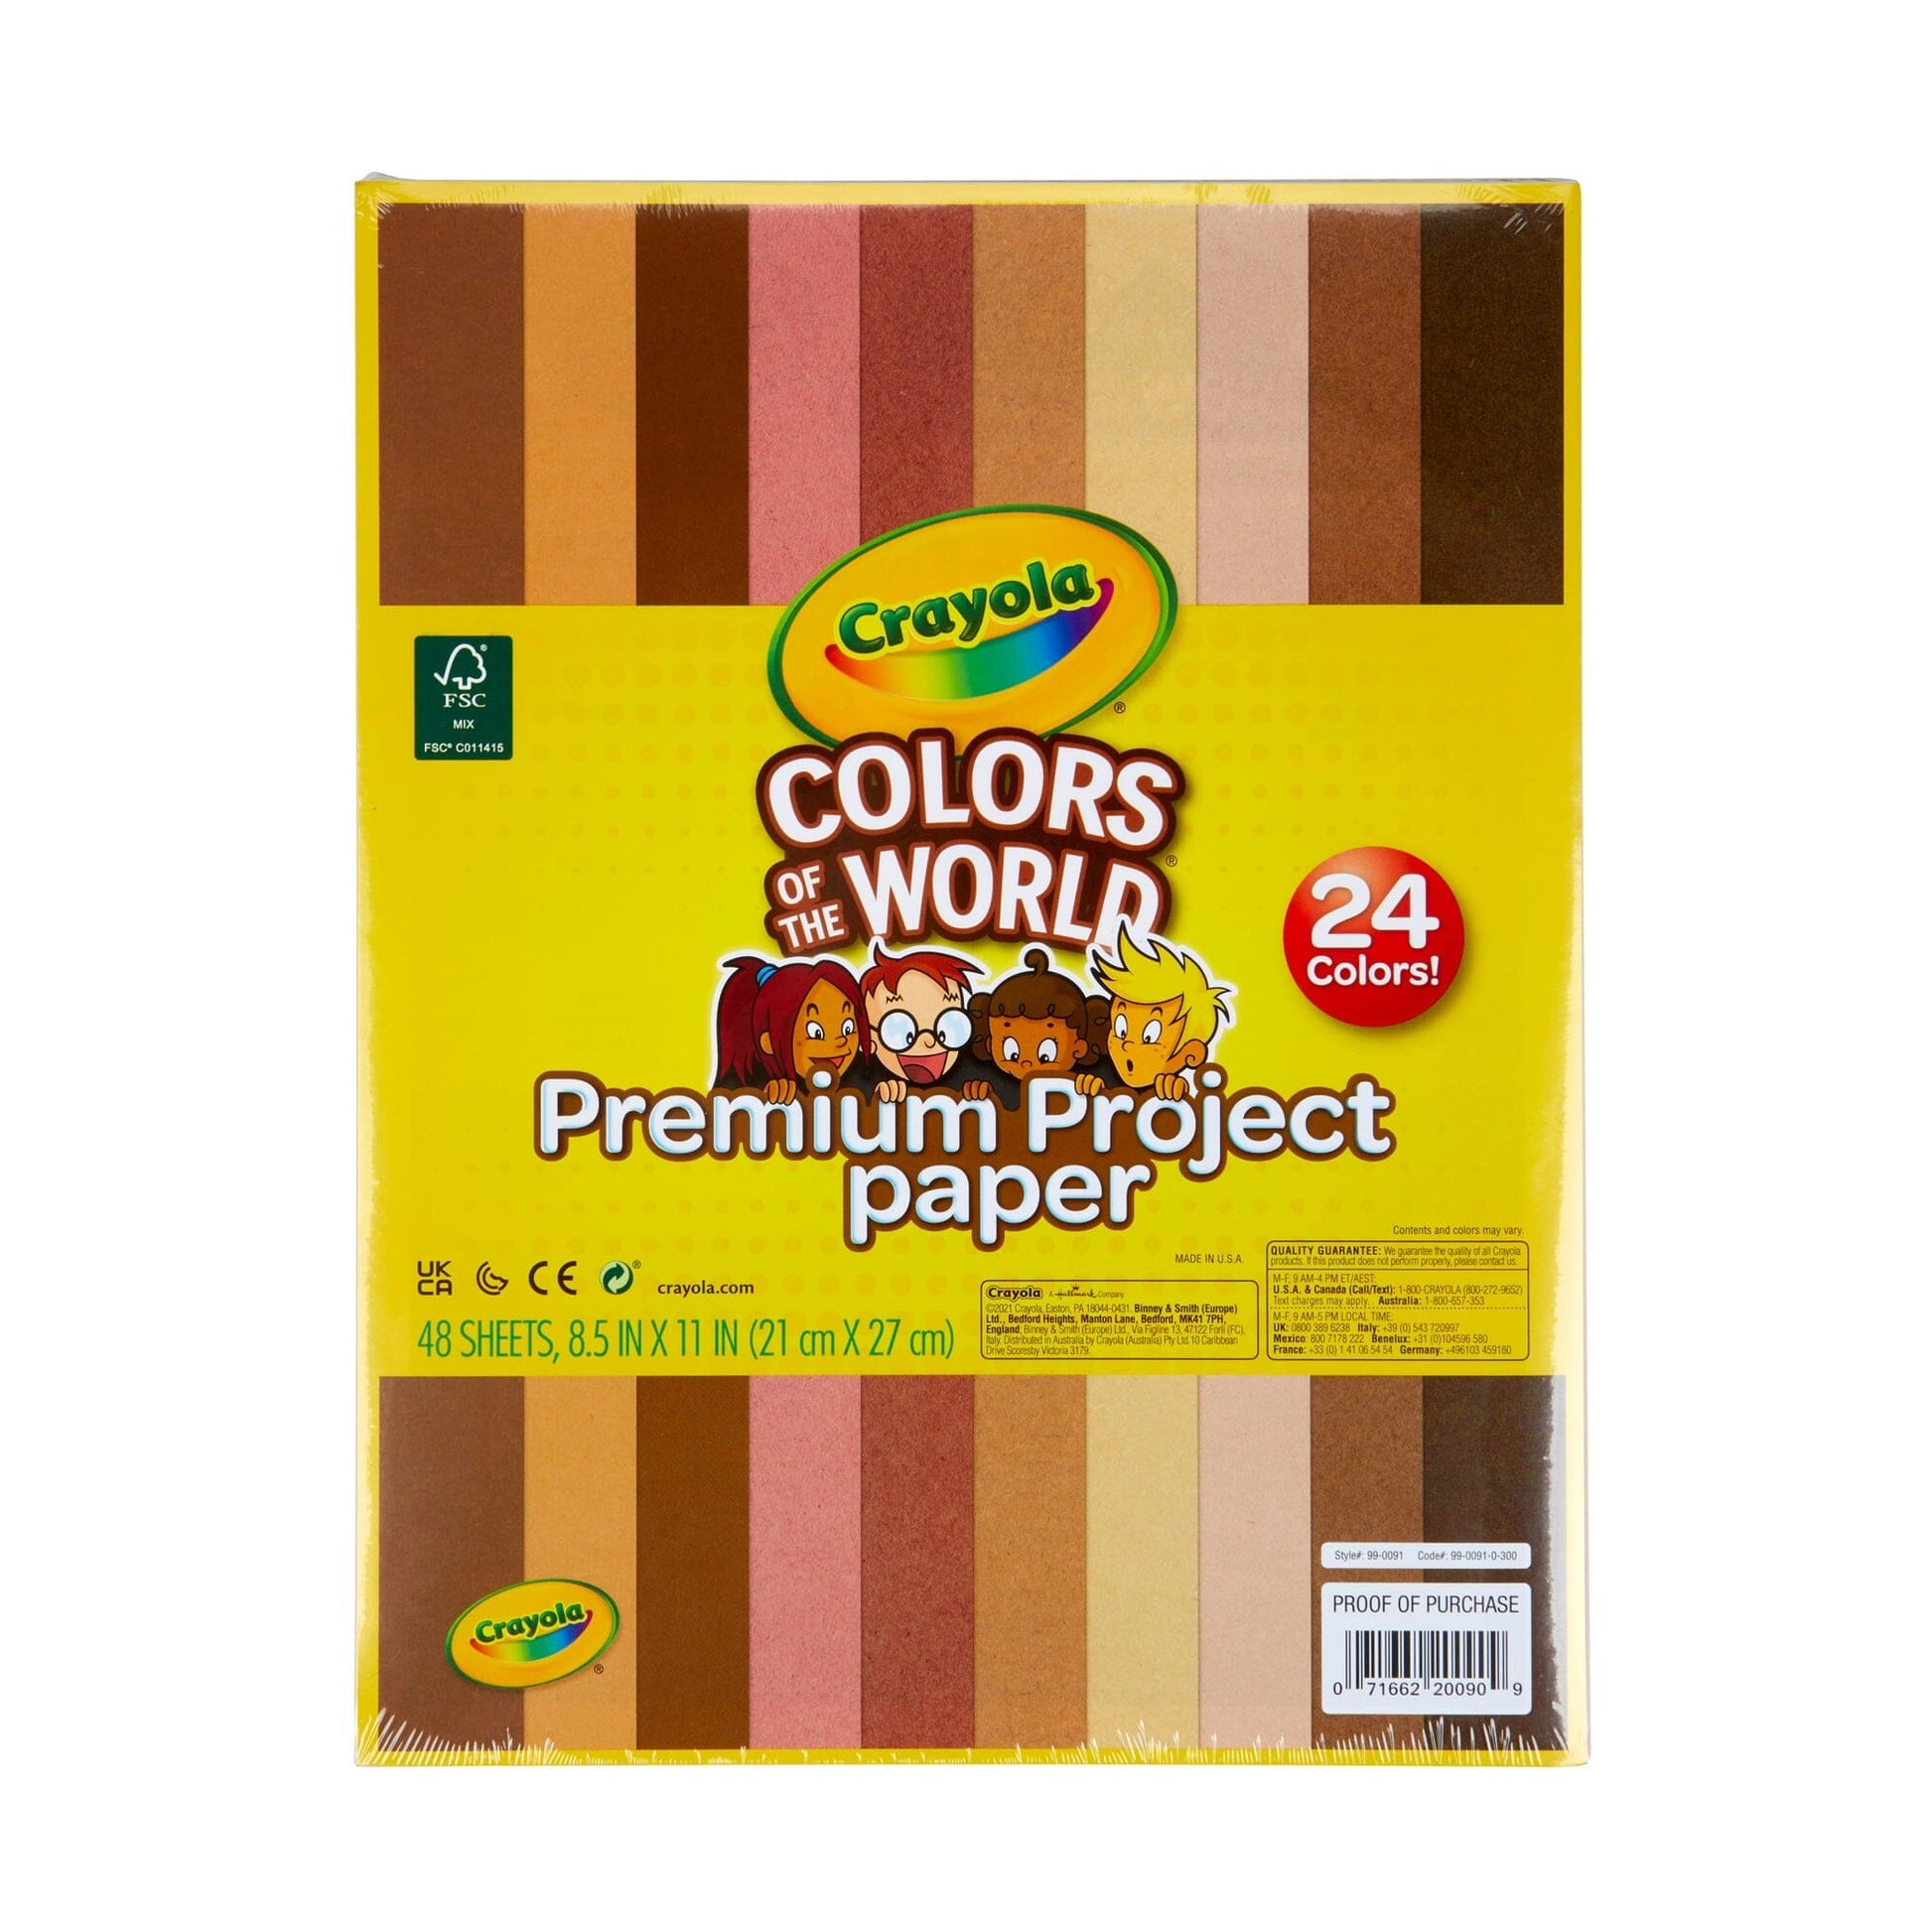 Arts And Crafts Supplies - Craft Kits, With Construction Paper And